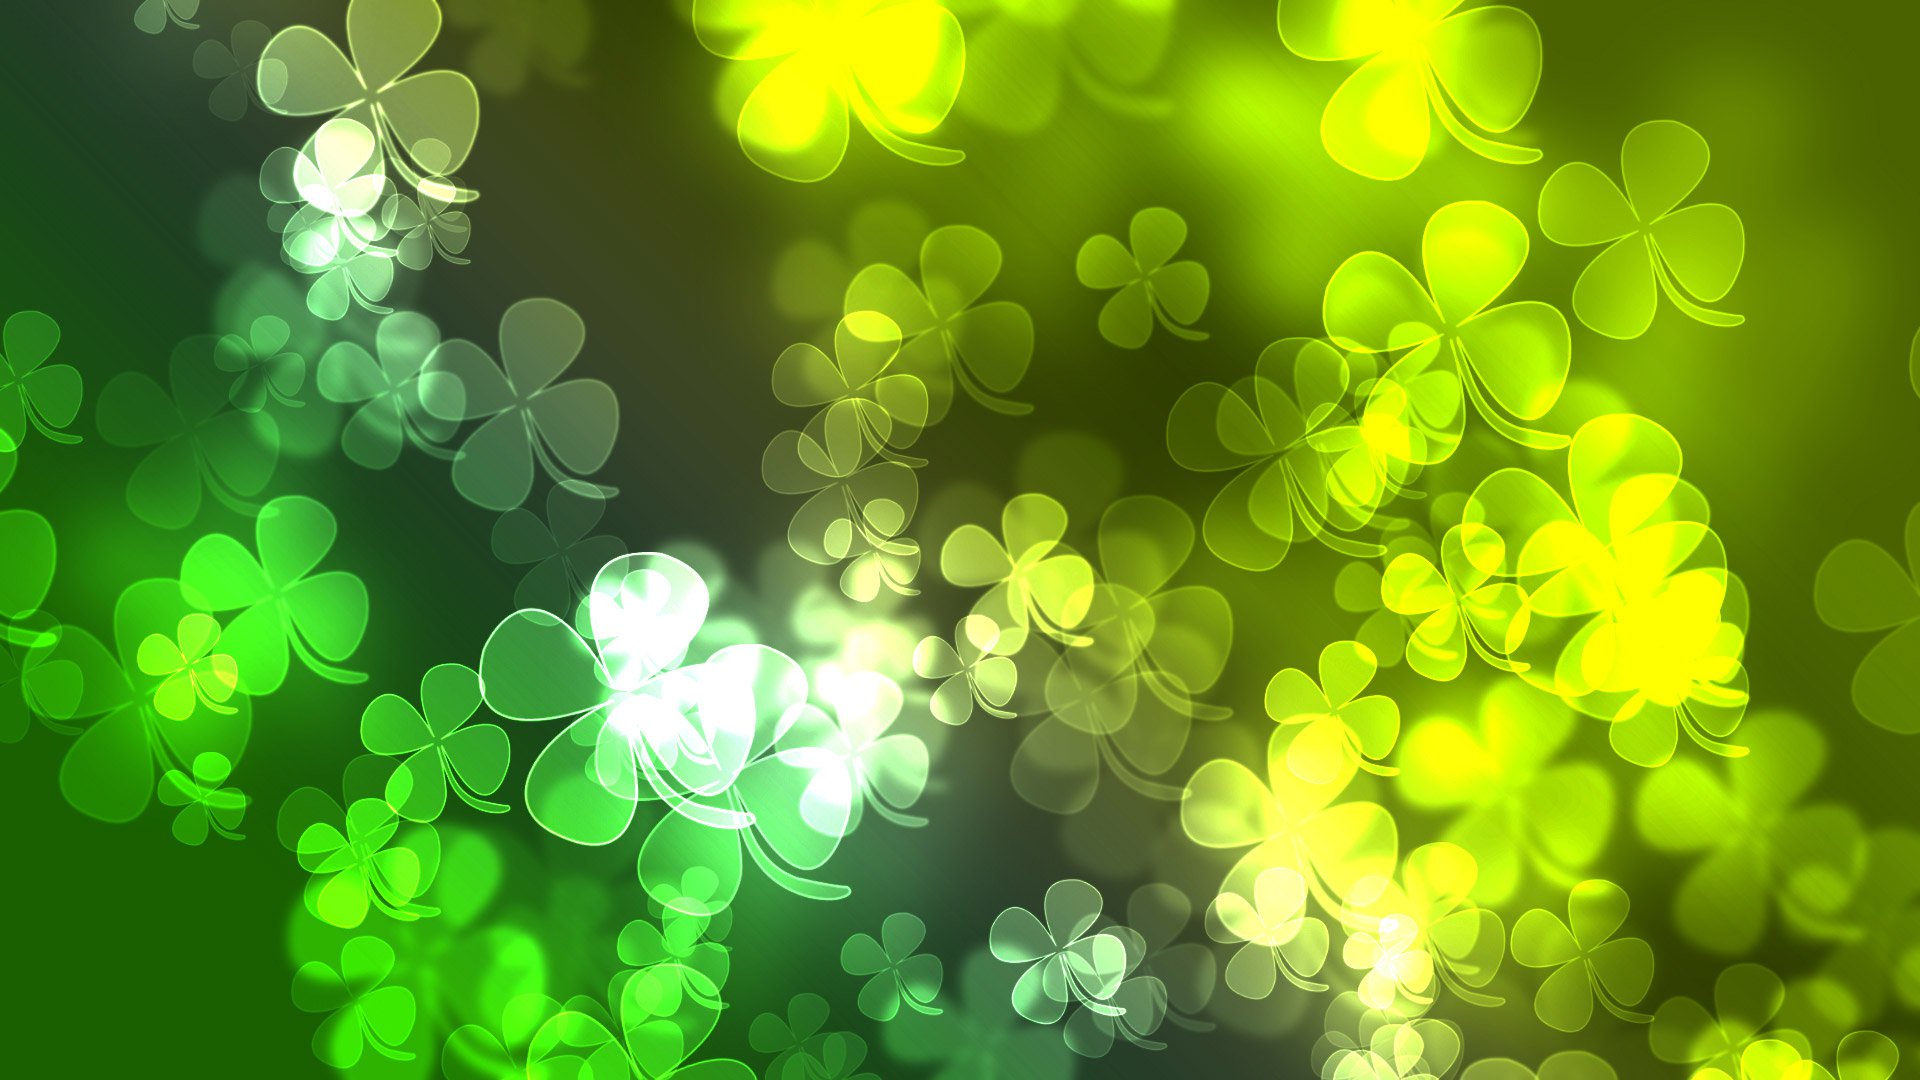 23 St Patricks Day themed wallpapers for your Android